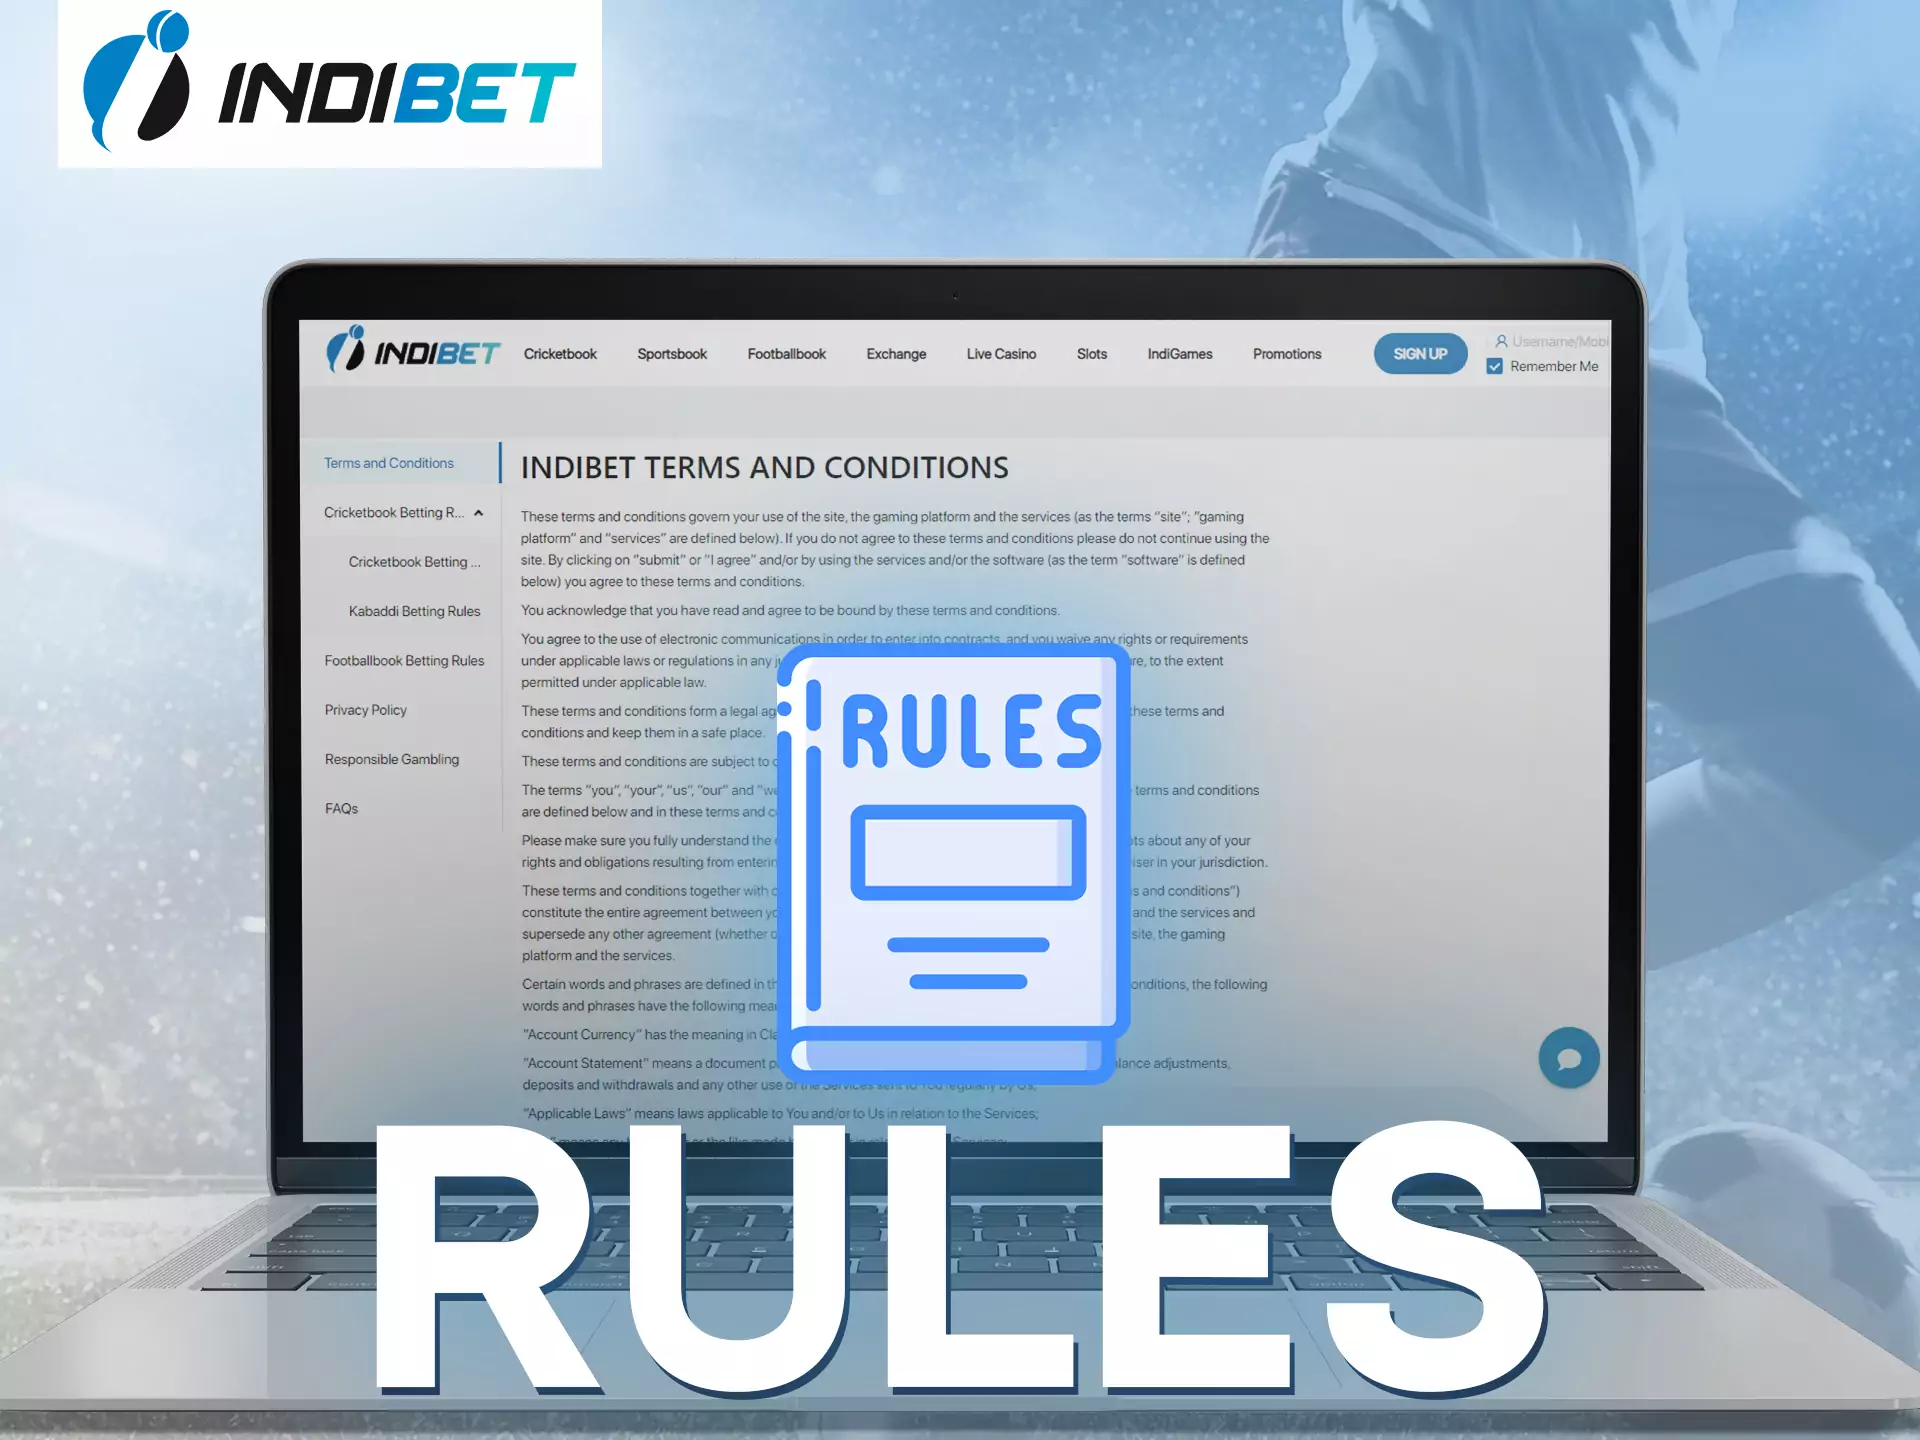 Learn the basic rules of Indibet to play and bet more effectively.